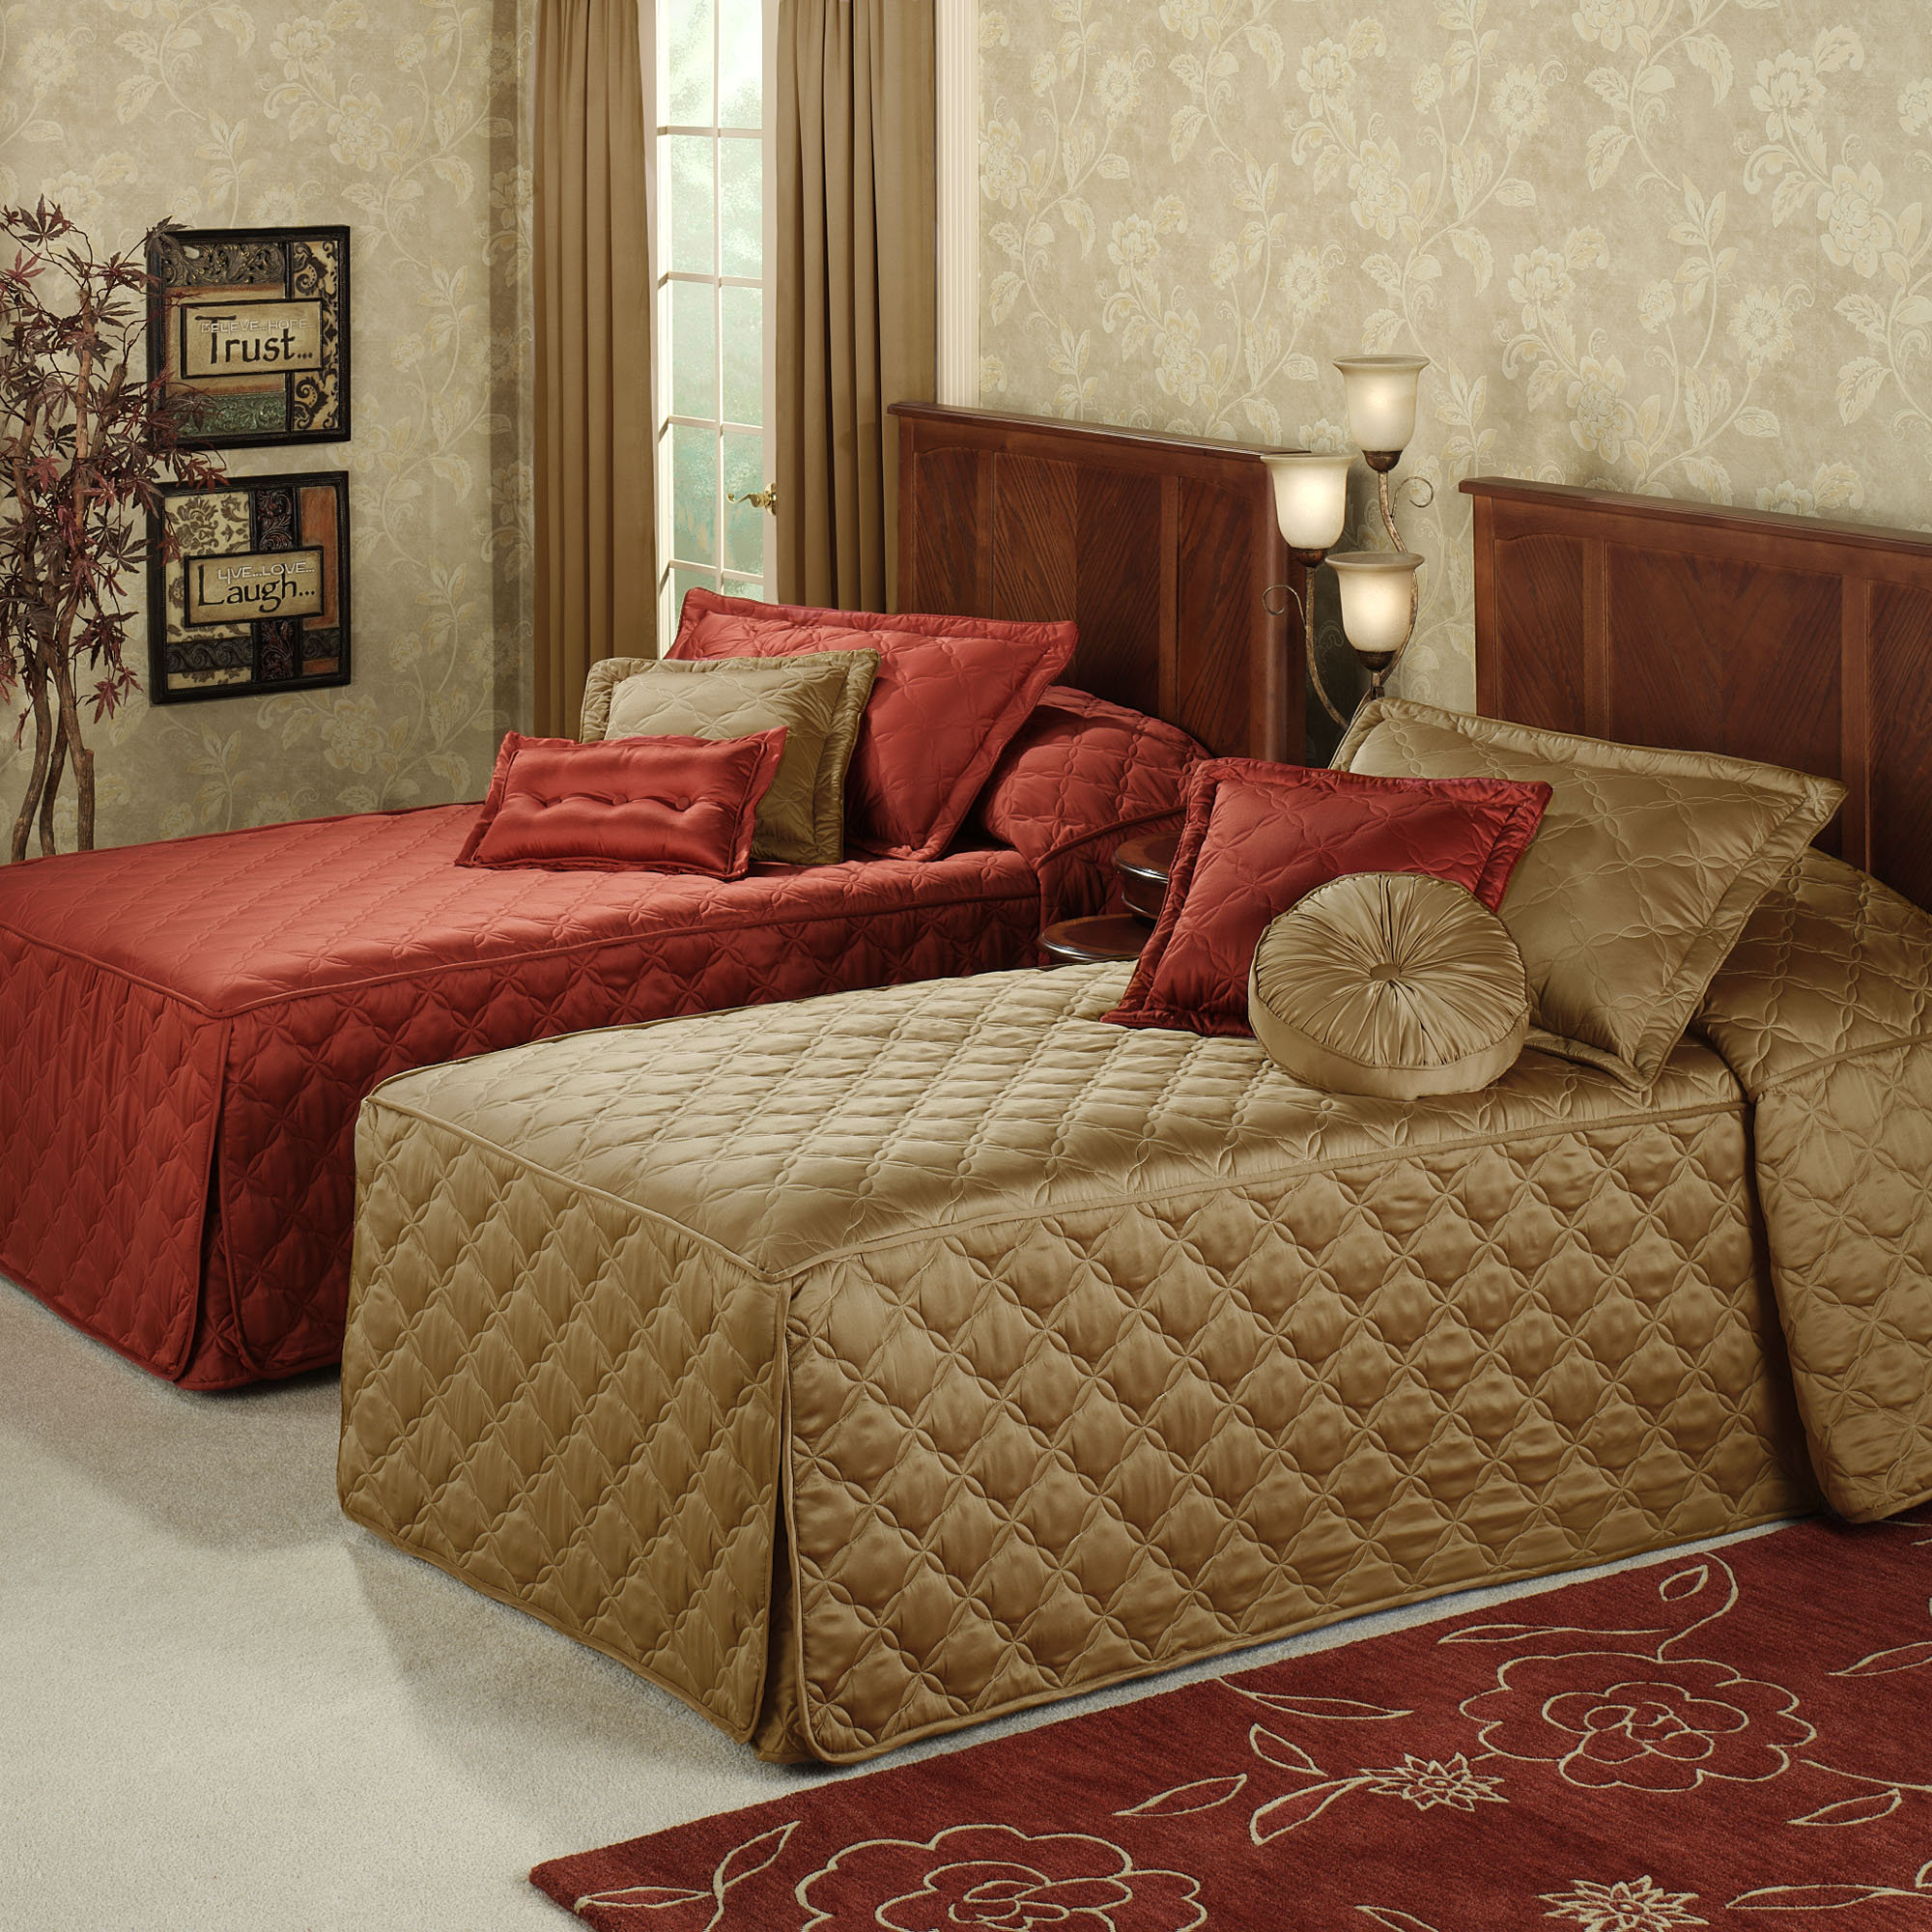 2000x2000px 8 Superb Fitted Bedspreads Picture in Bedroom